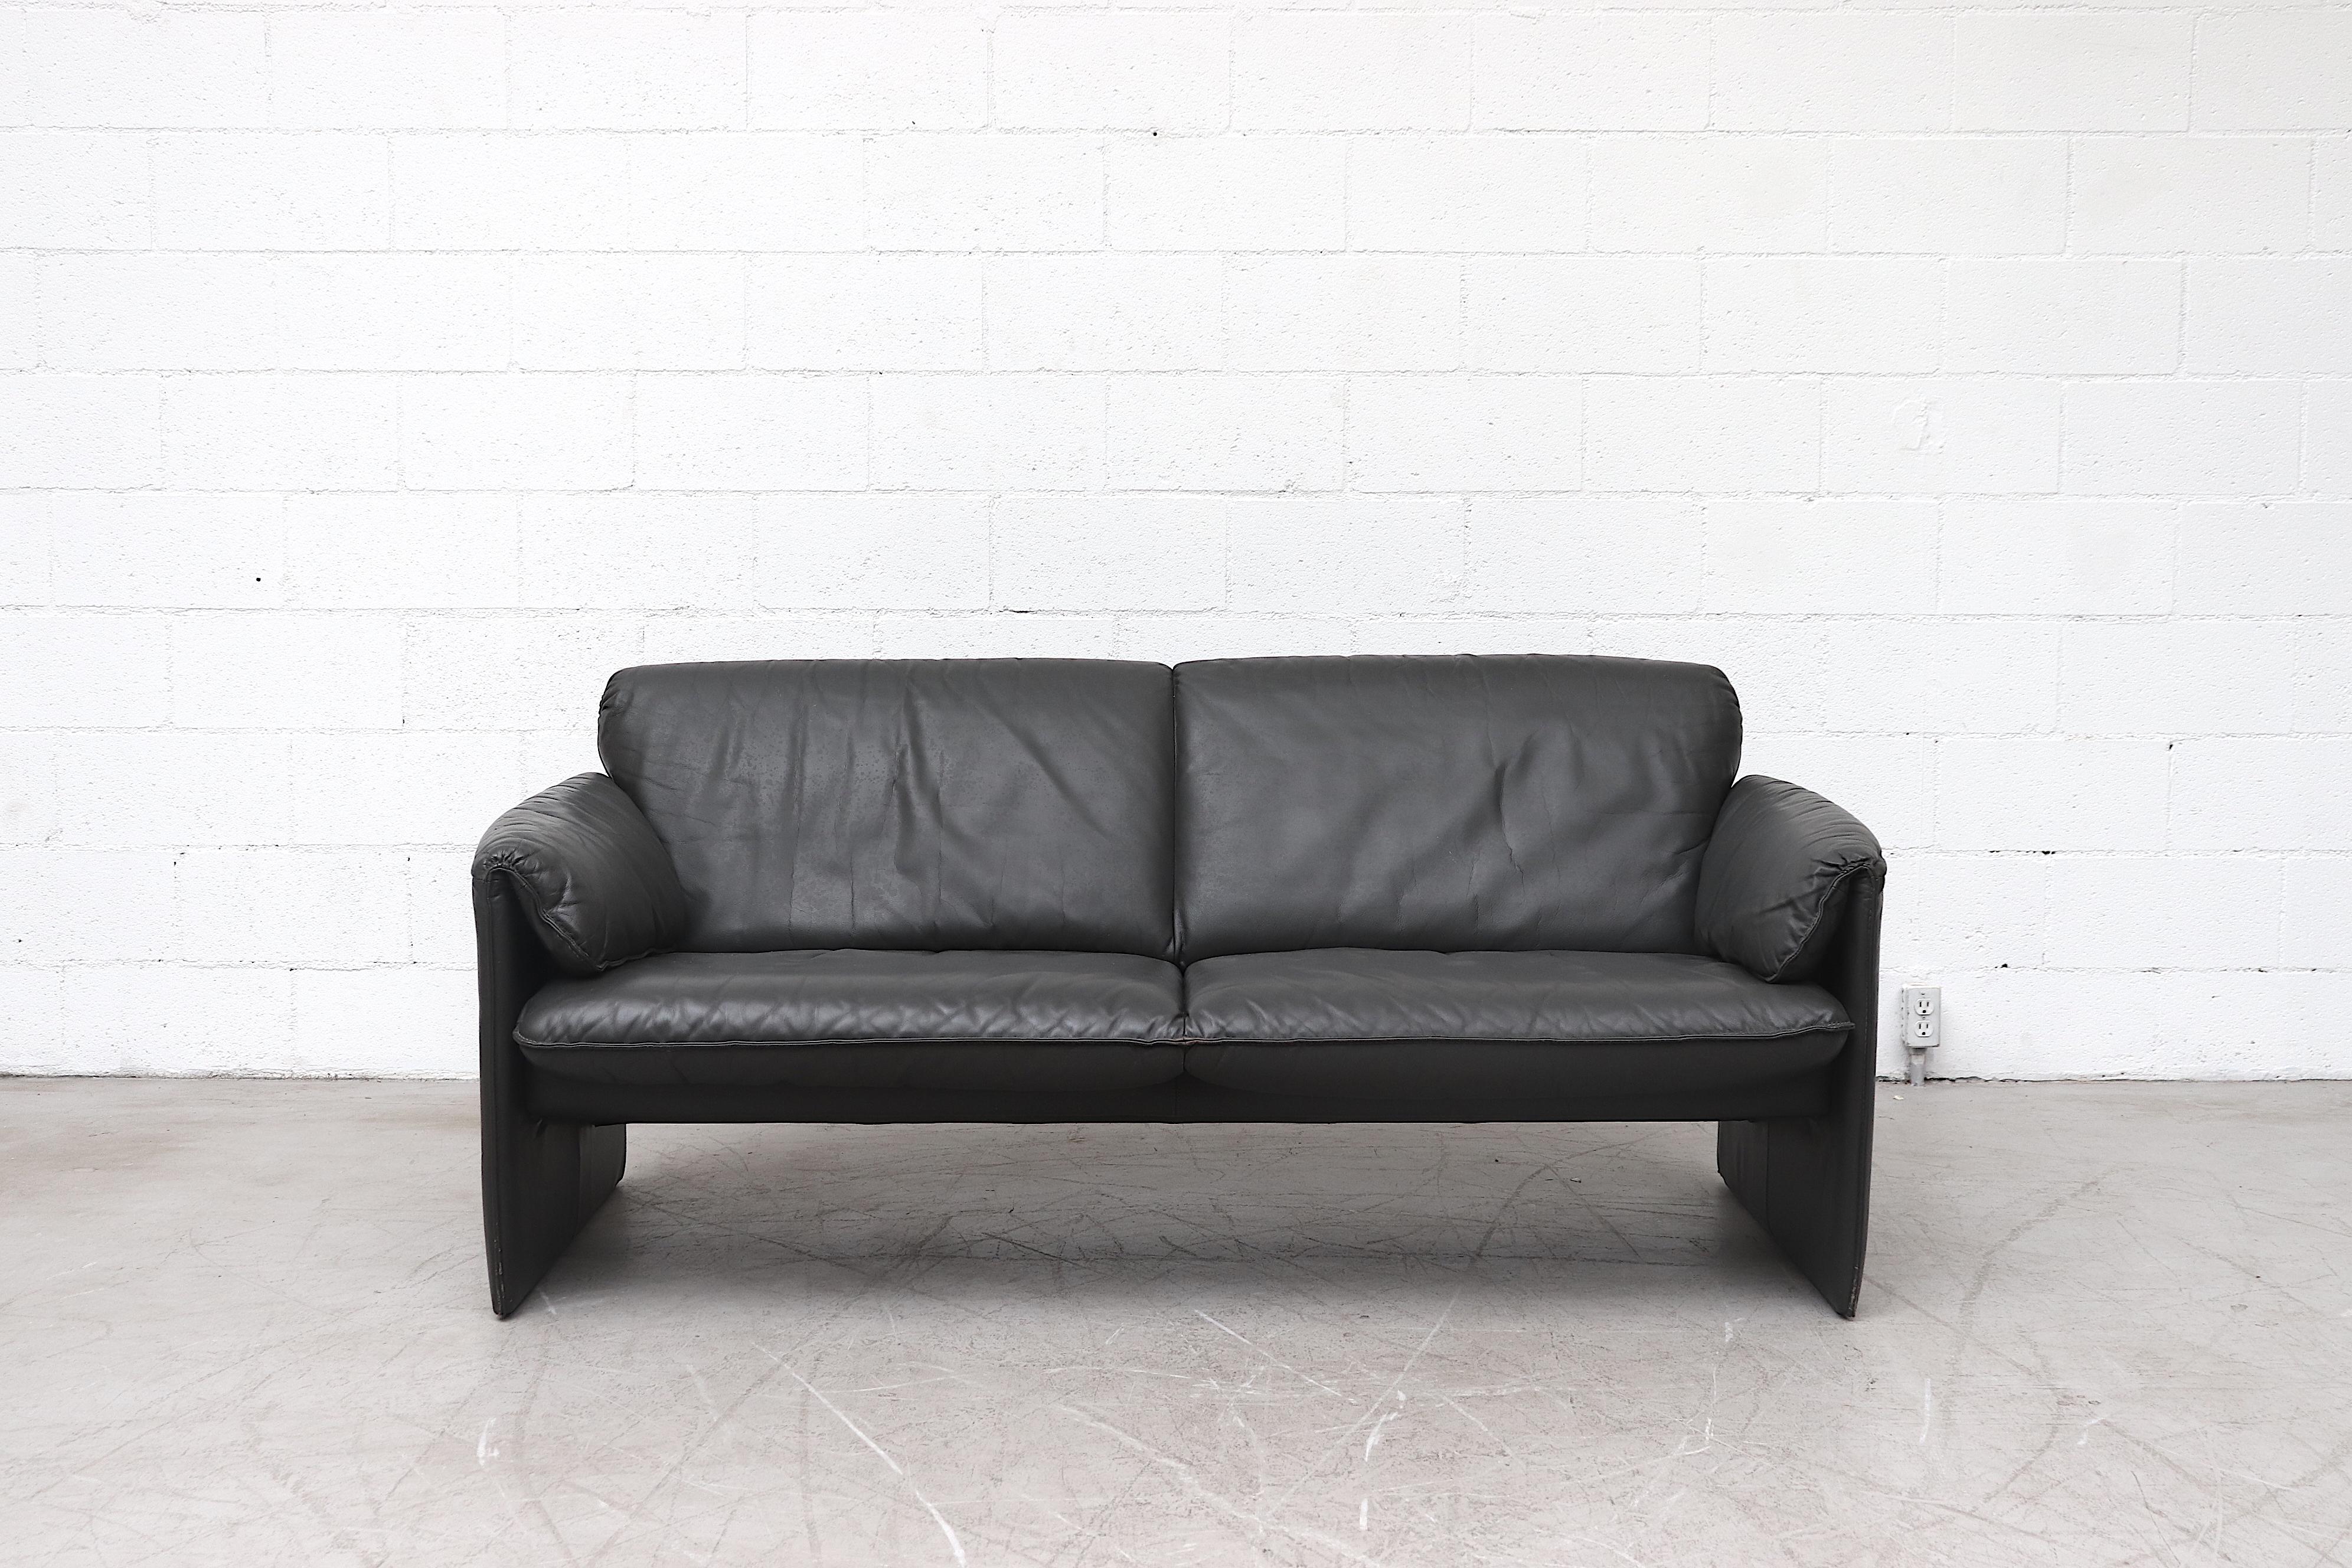 Sleek charcoal leather 'Bora Bora' 2-seat sofa by Leolux. In original condition with manufacturer engraving and some visible wear and scratching. Other similar sofas also available in turquoise (LU922417026492) and black listed separately.